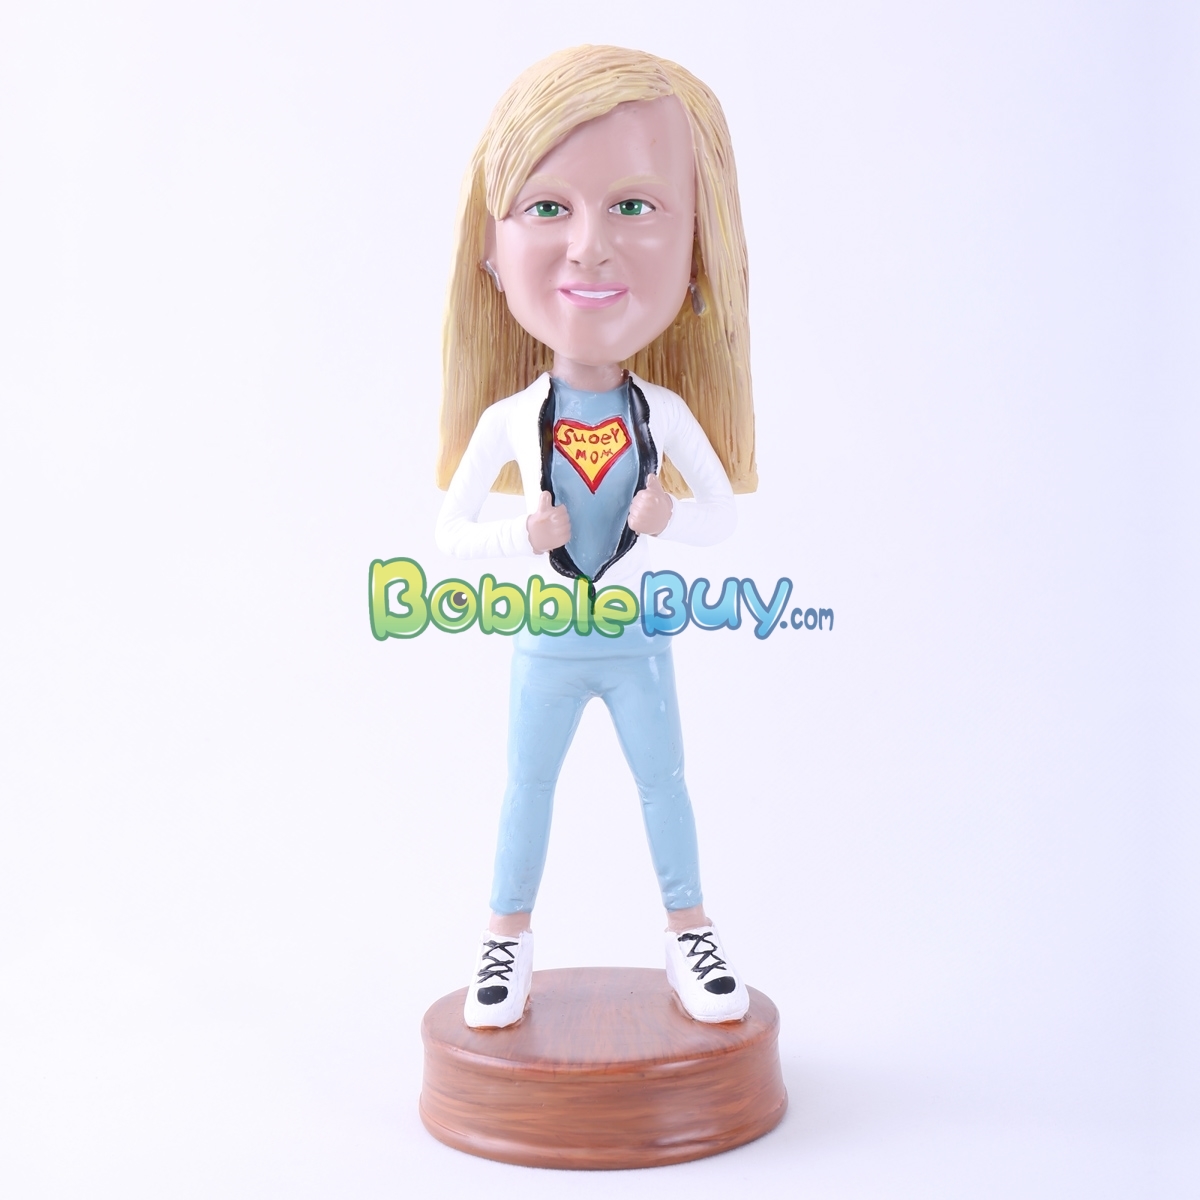 Mother's Day Gifts Custom Super Mom Bobbleheads In Red Cloak